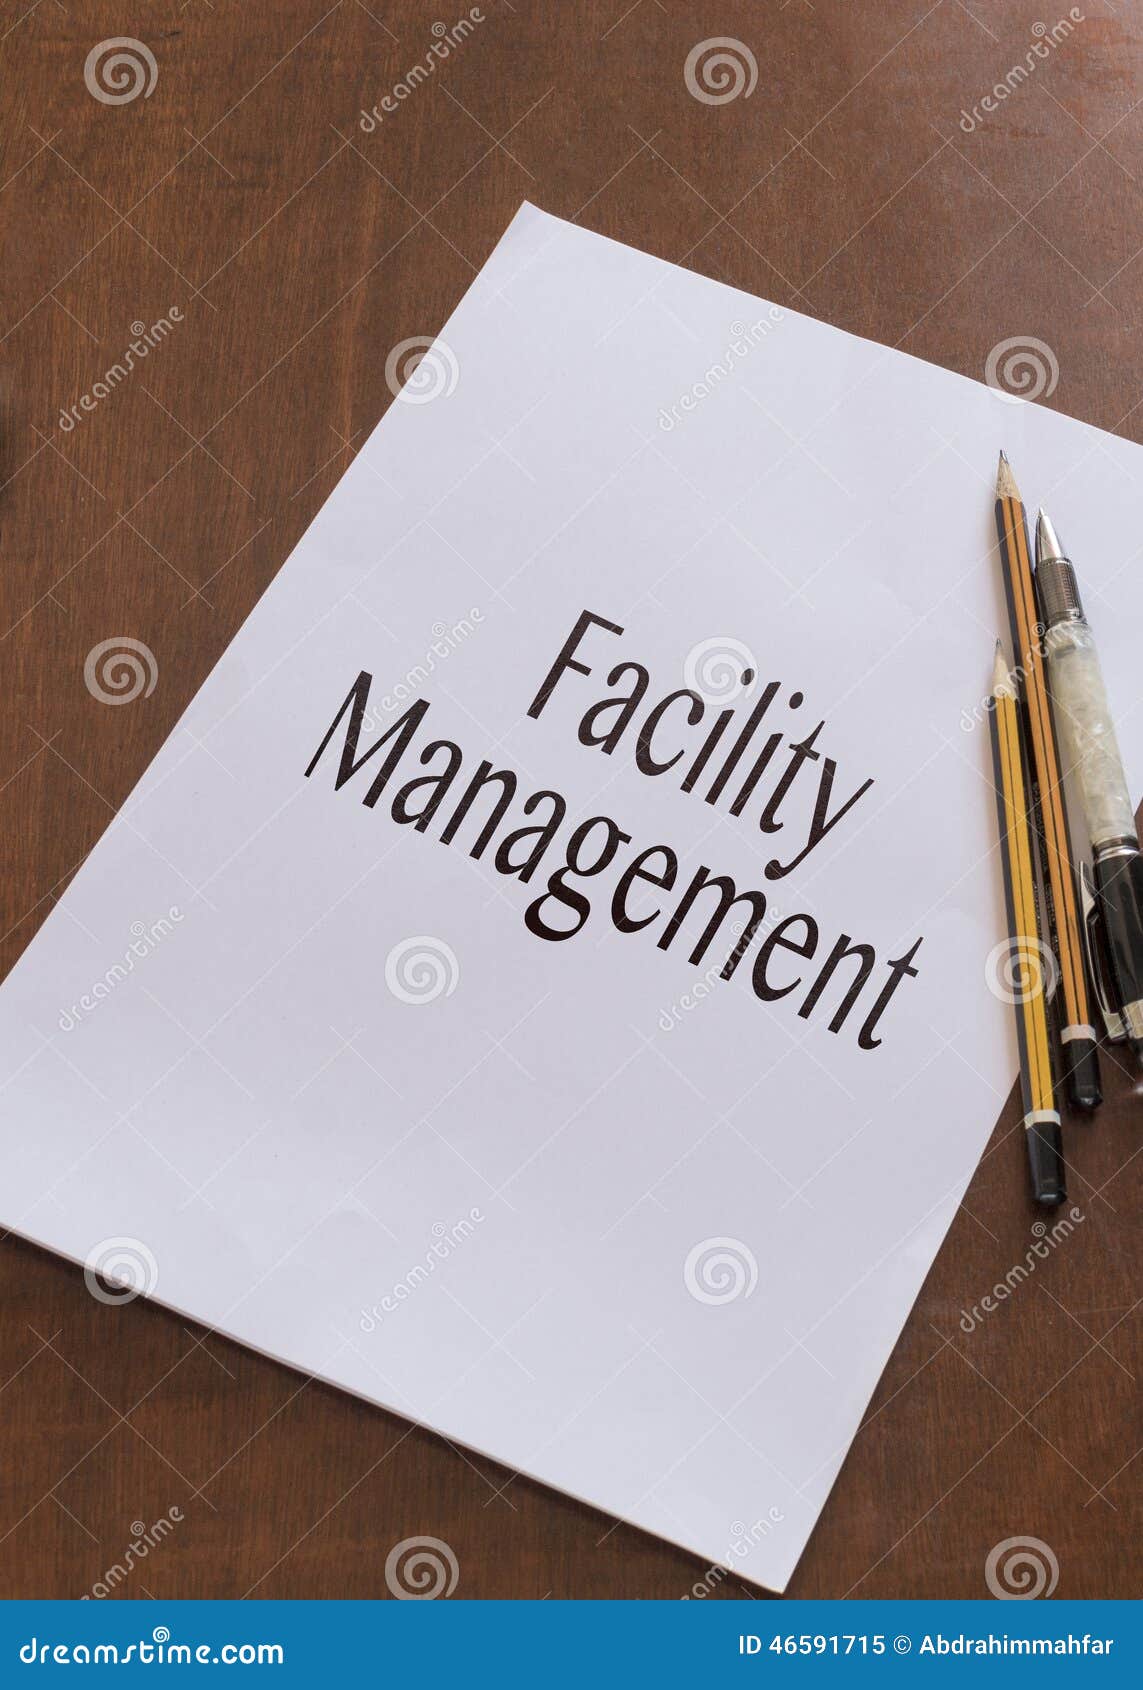 facility management writen on paper